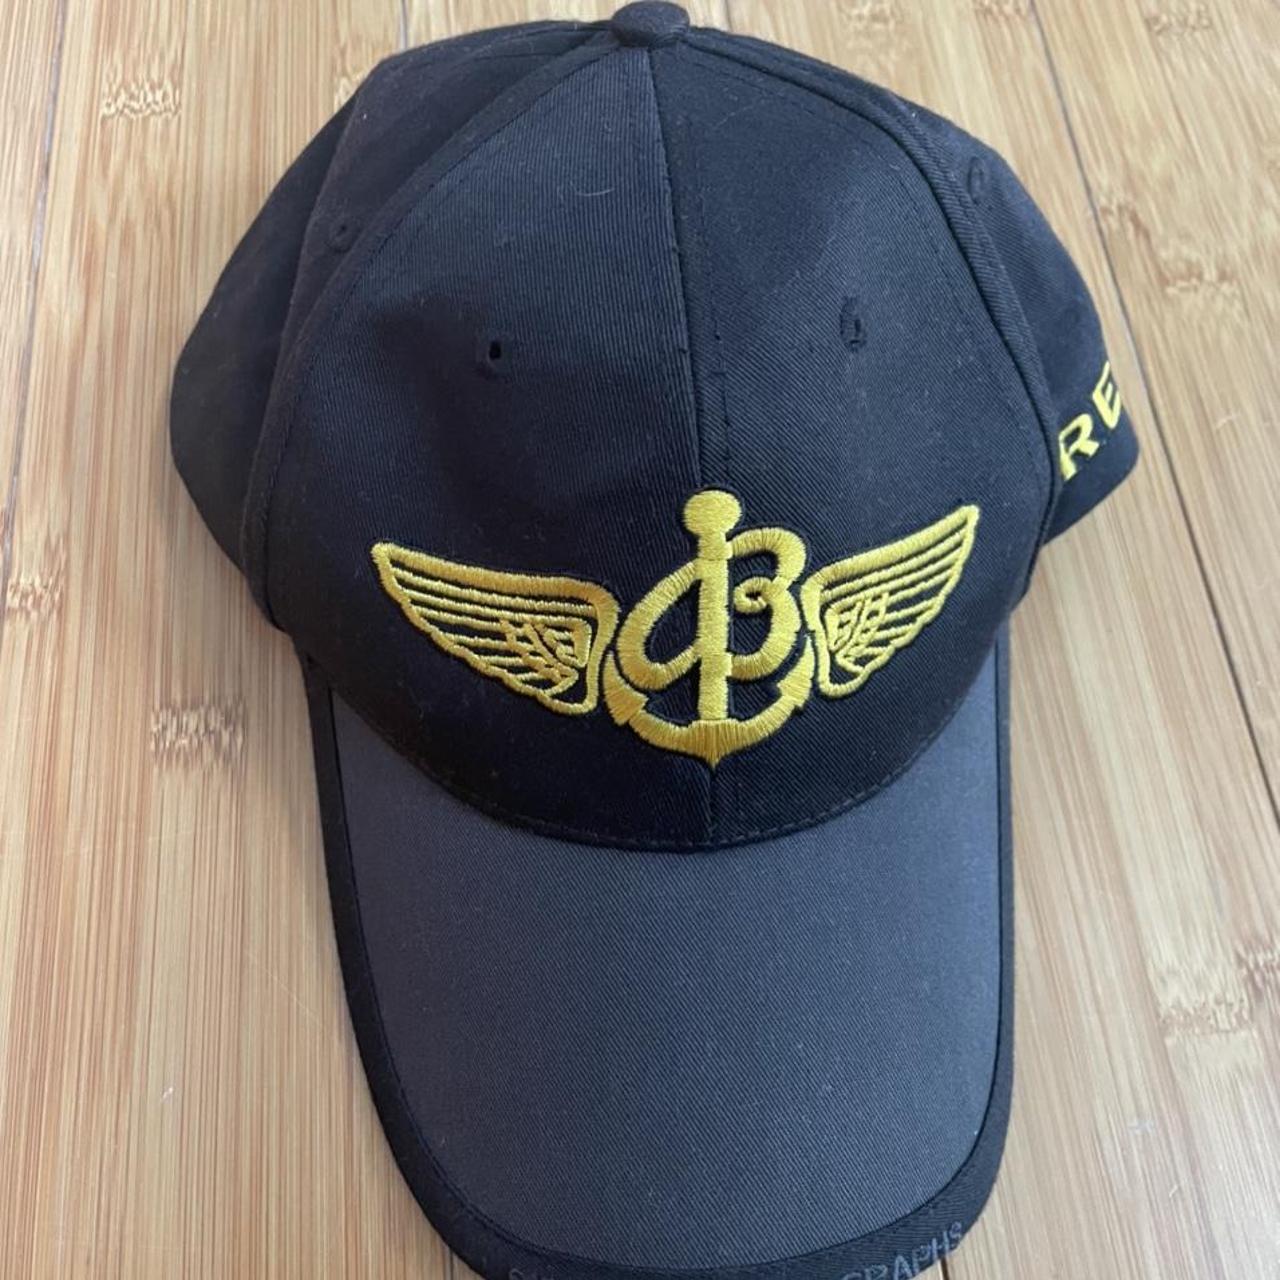 Product Image 1 - Breitling Swiss chronograph hat. Comes